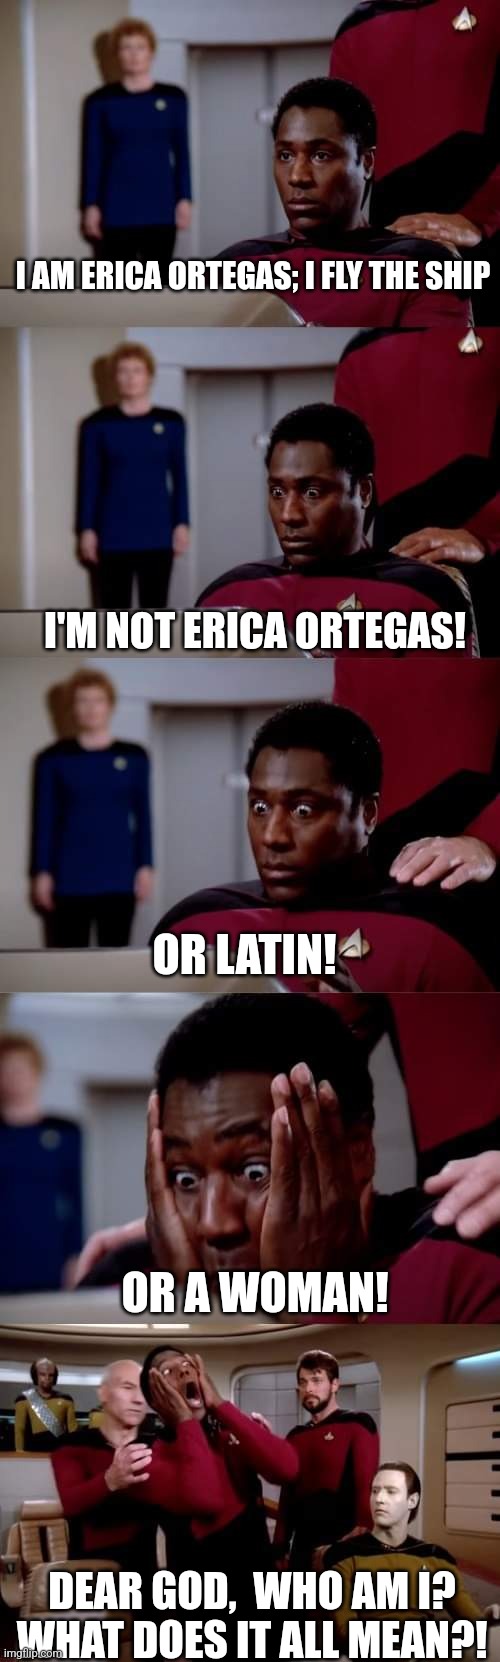 Identity crisis | I AM ERICA ORTEGAS; I FLY THE SHIP; I'M NOT ERICA ORTEGAS! OR LATIN! OR A WOMAN! DEAR GOD,  WHO AM I? WHAT DOES IT ALL MEAN?! | image tagged in star trek | made w/ Imgflip meme maker